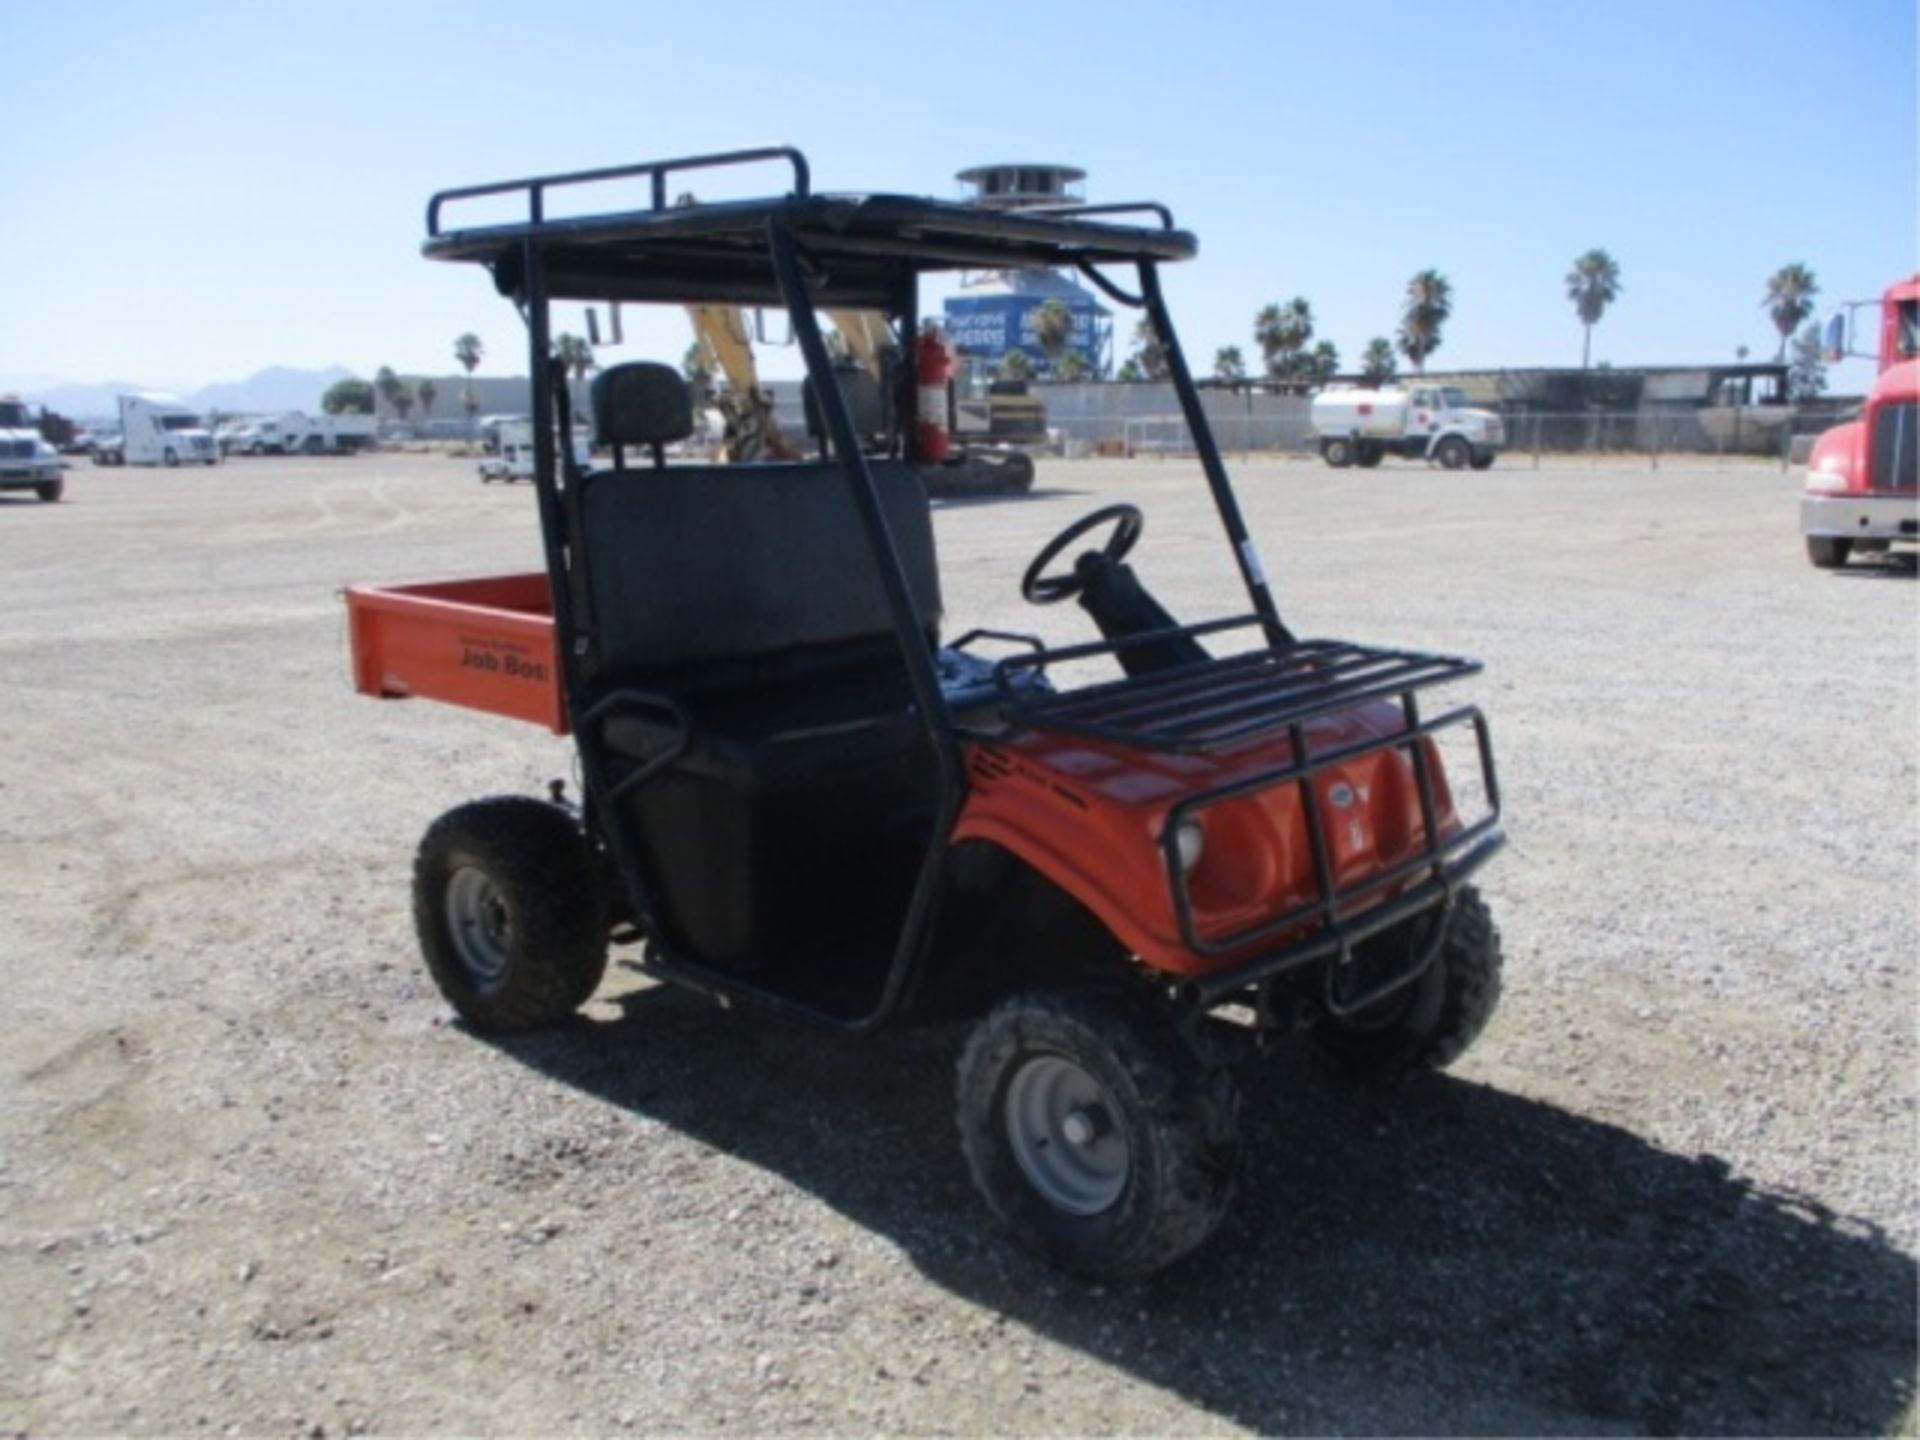 2008 American Sportworks Job Boss Utility Cart, Honda Gas, Rear Metal Dump Bed, Canopy, Tow Hitch, - Image 7 of 50